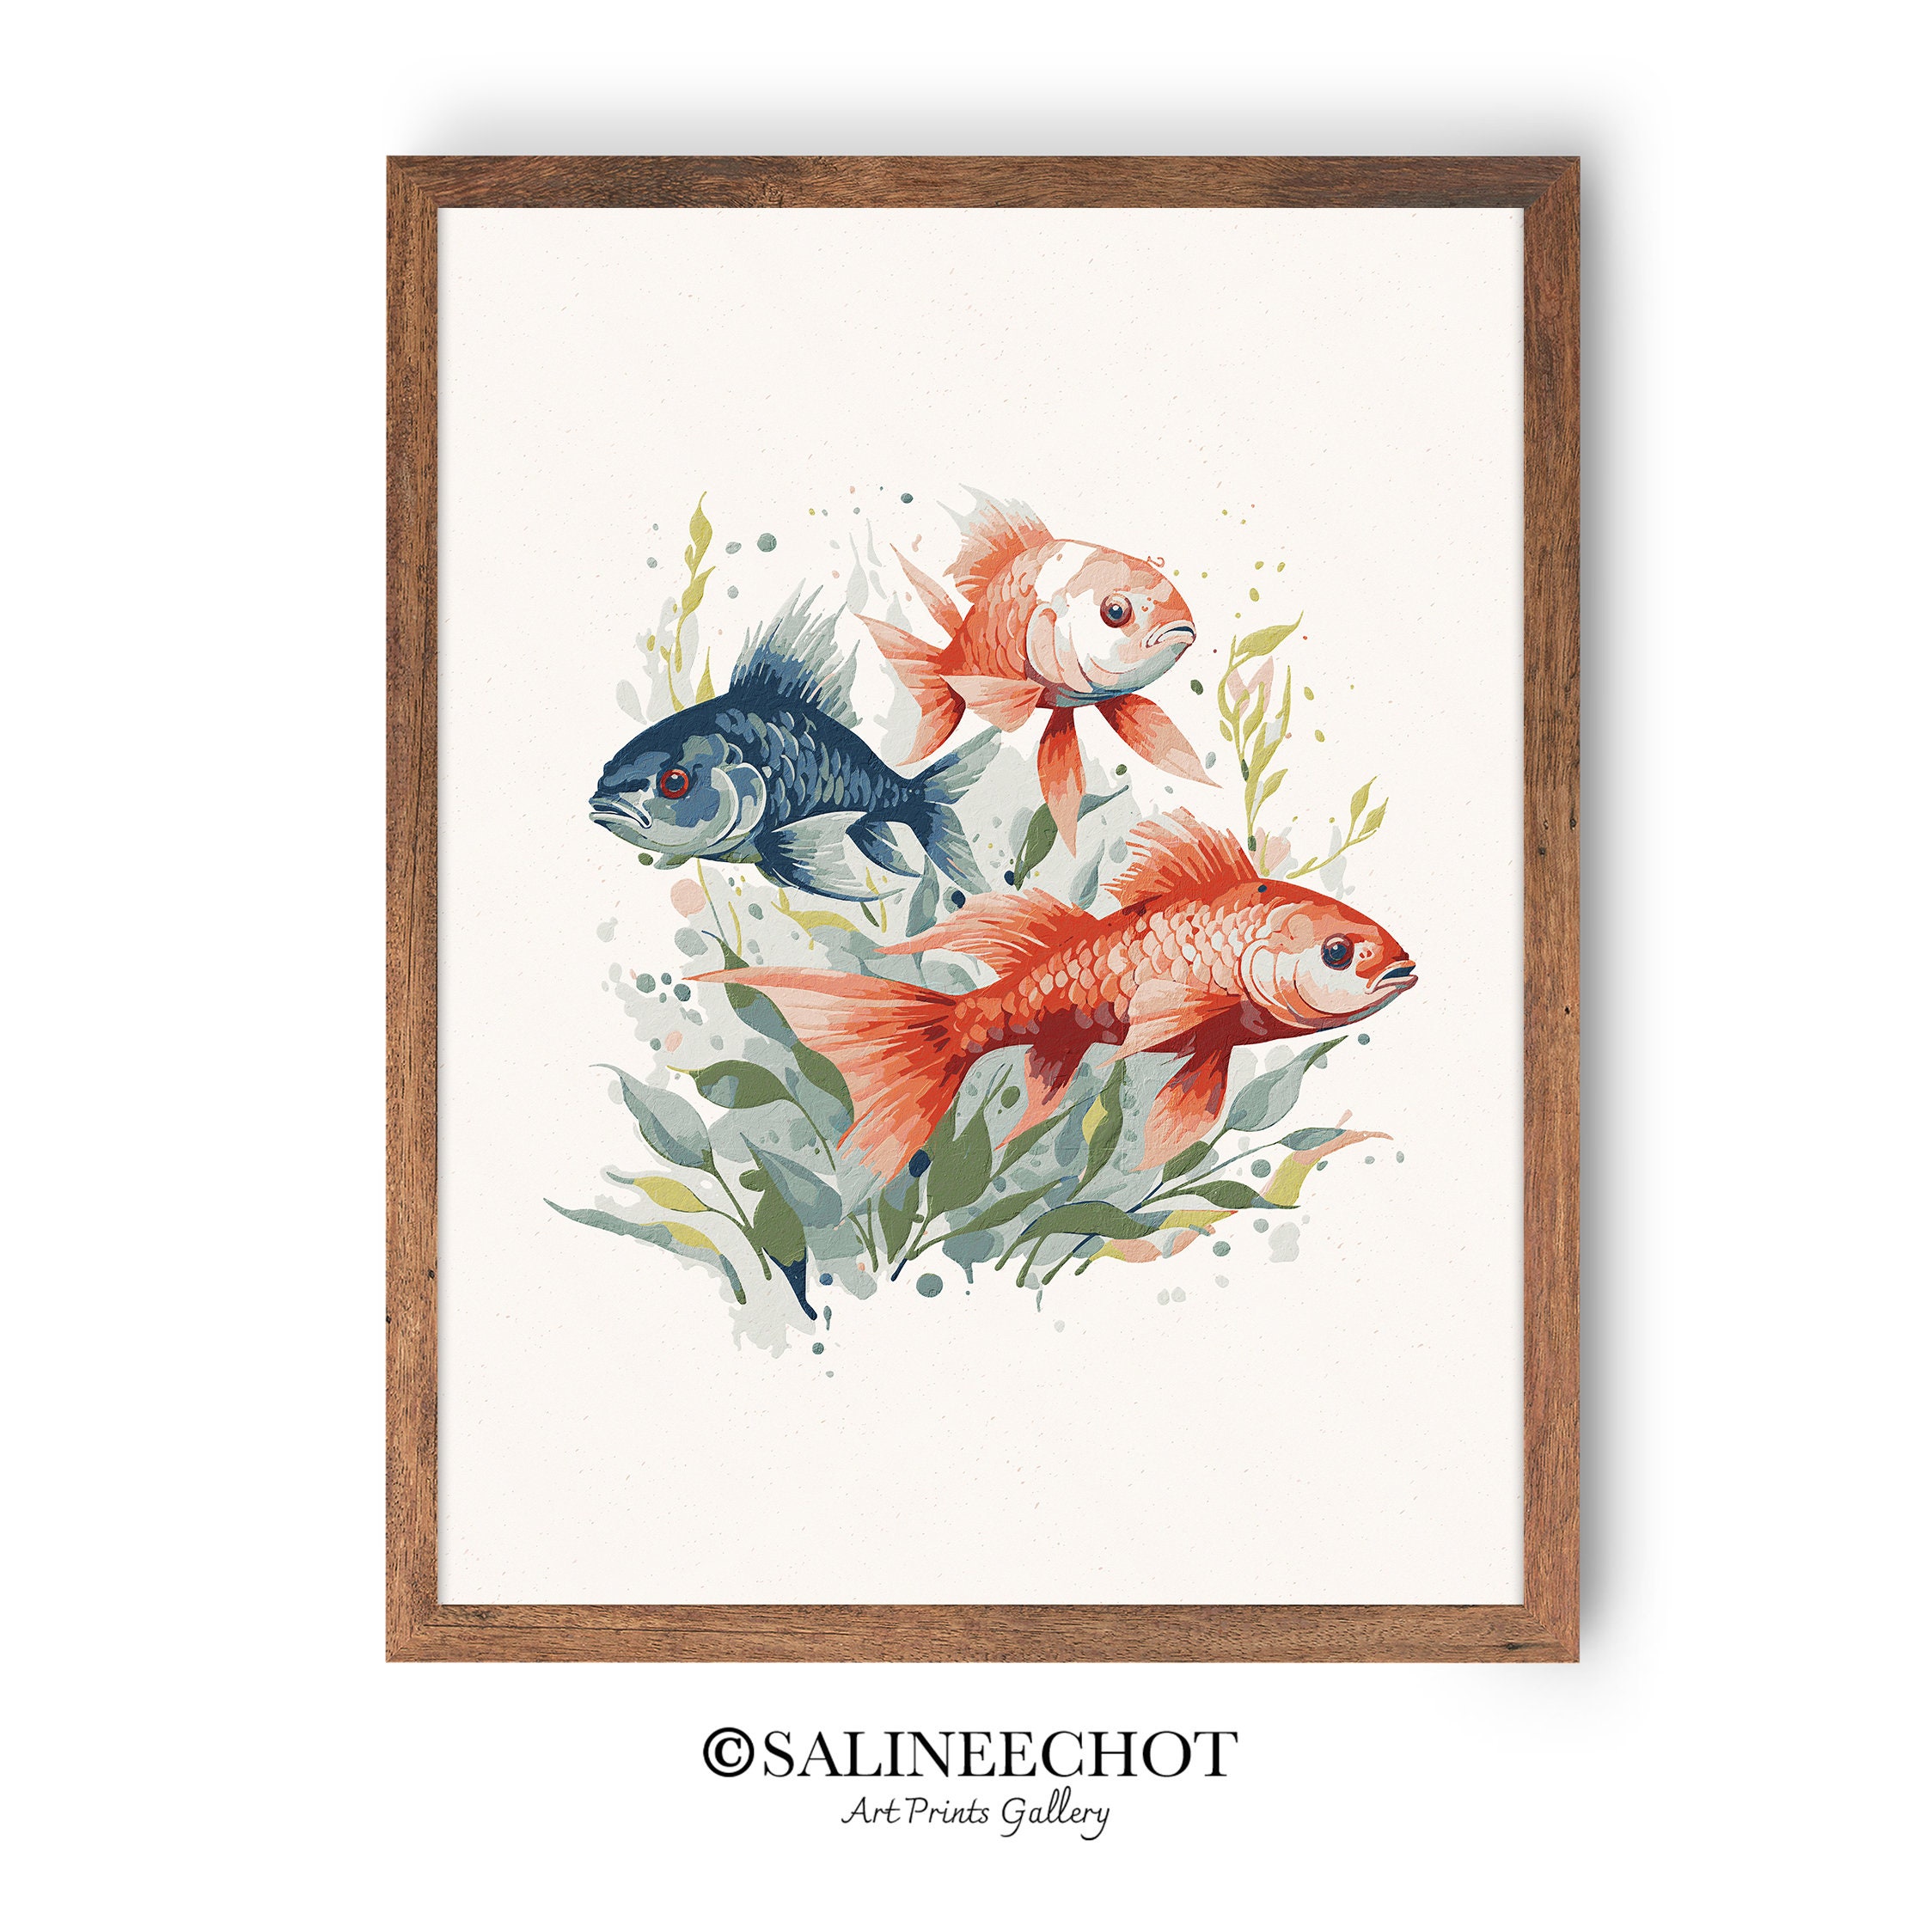 Yin Yang Koi Or Carp Fish In Pond - Download From Over 50 Million